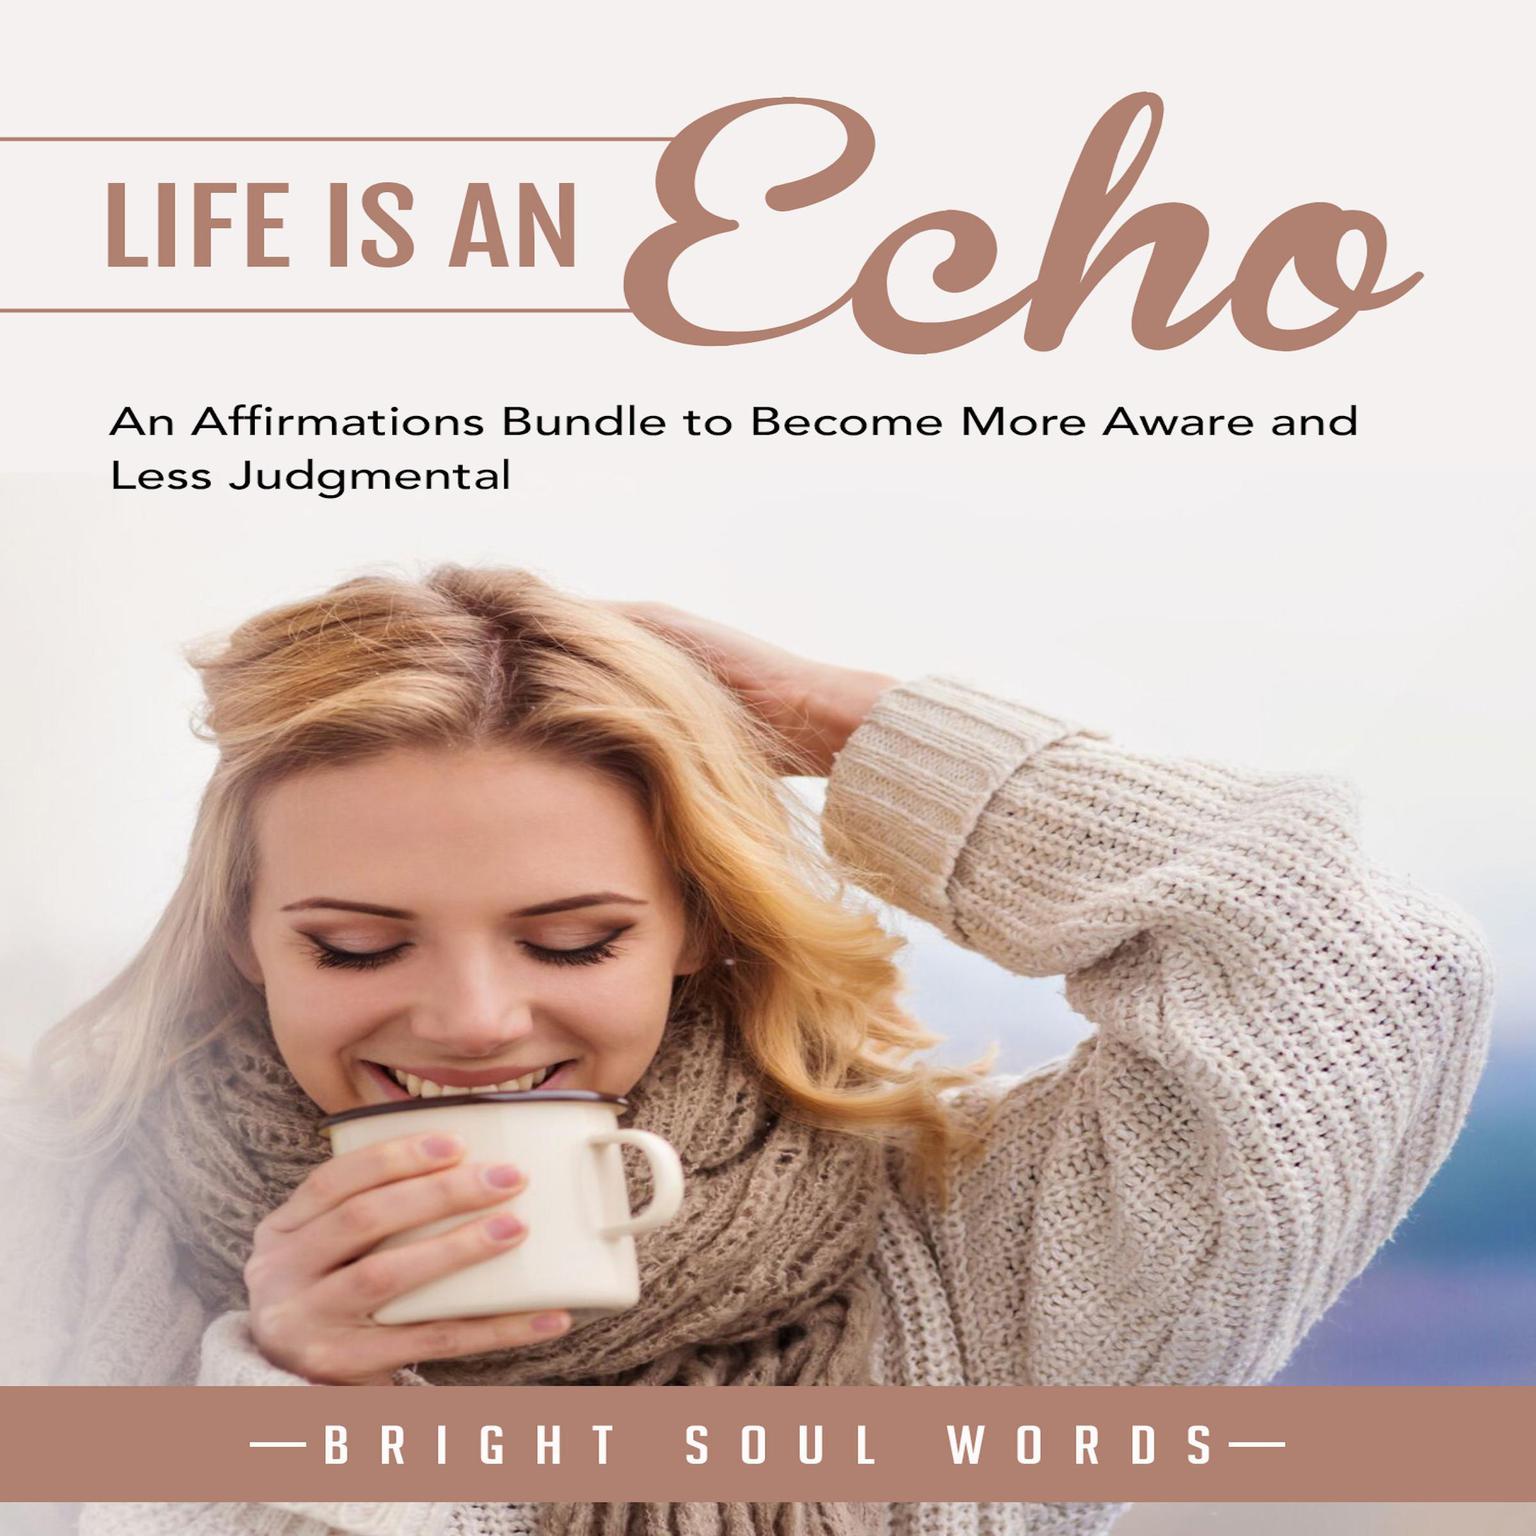 Life is an Echo: An Affirmations Bundle to Become More Aware and Less Judgmental Audiobook, by Bright Soul Words